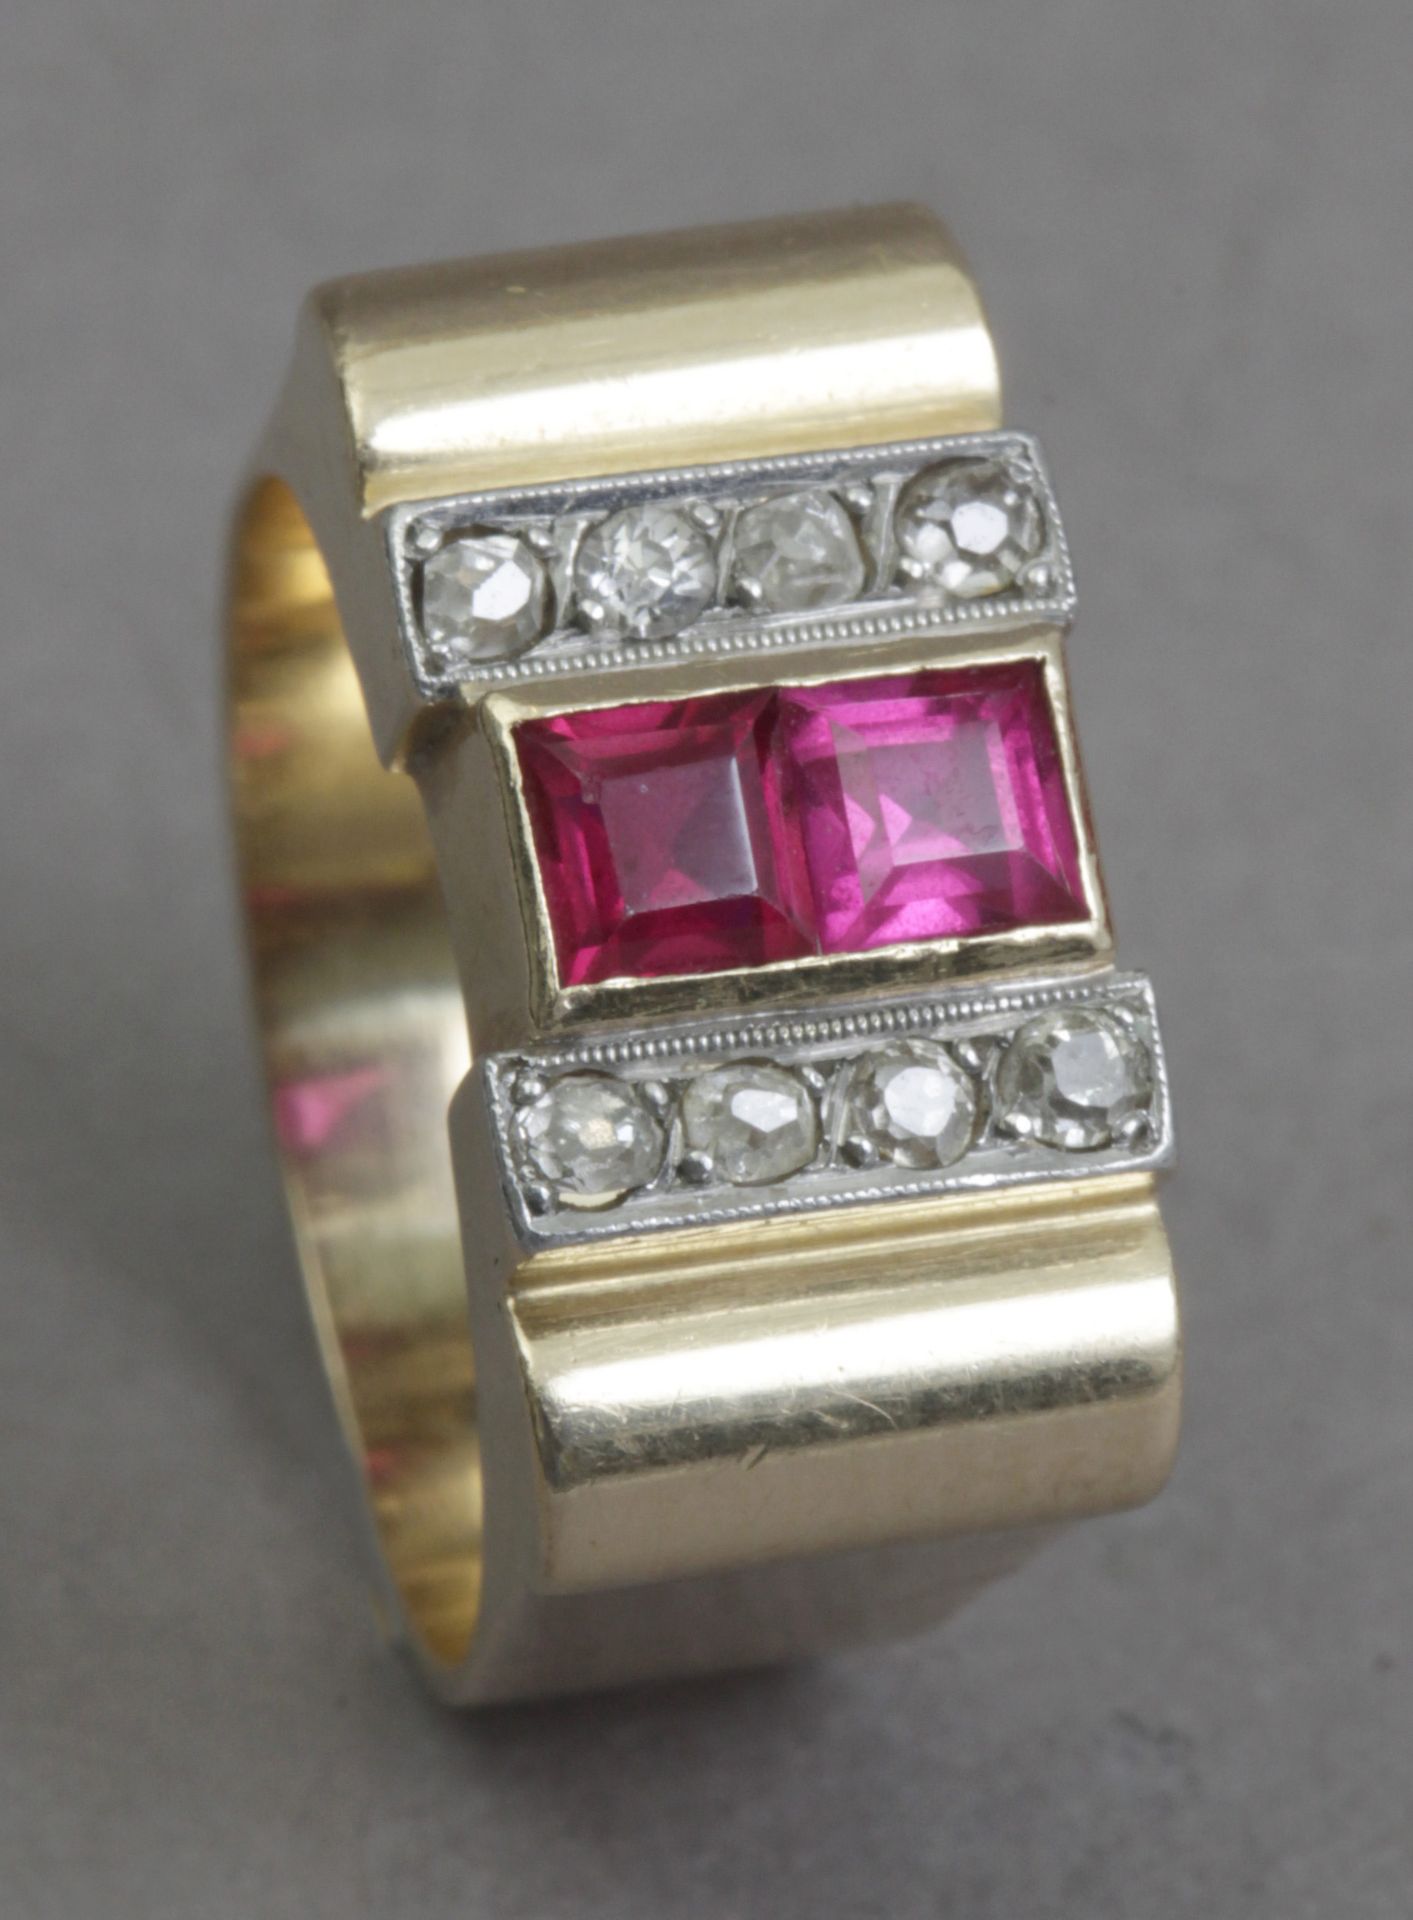 A chevalier ring circa 1940 in gold, platinum, diamonds and rubies - Image 3 of 6